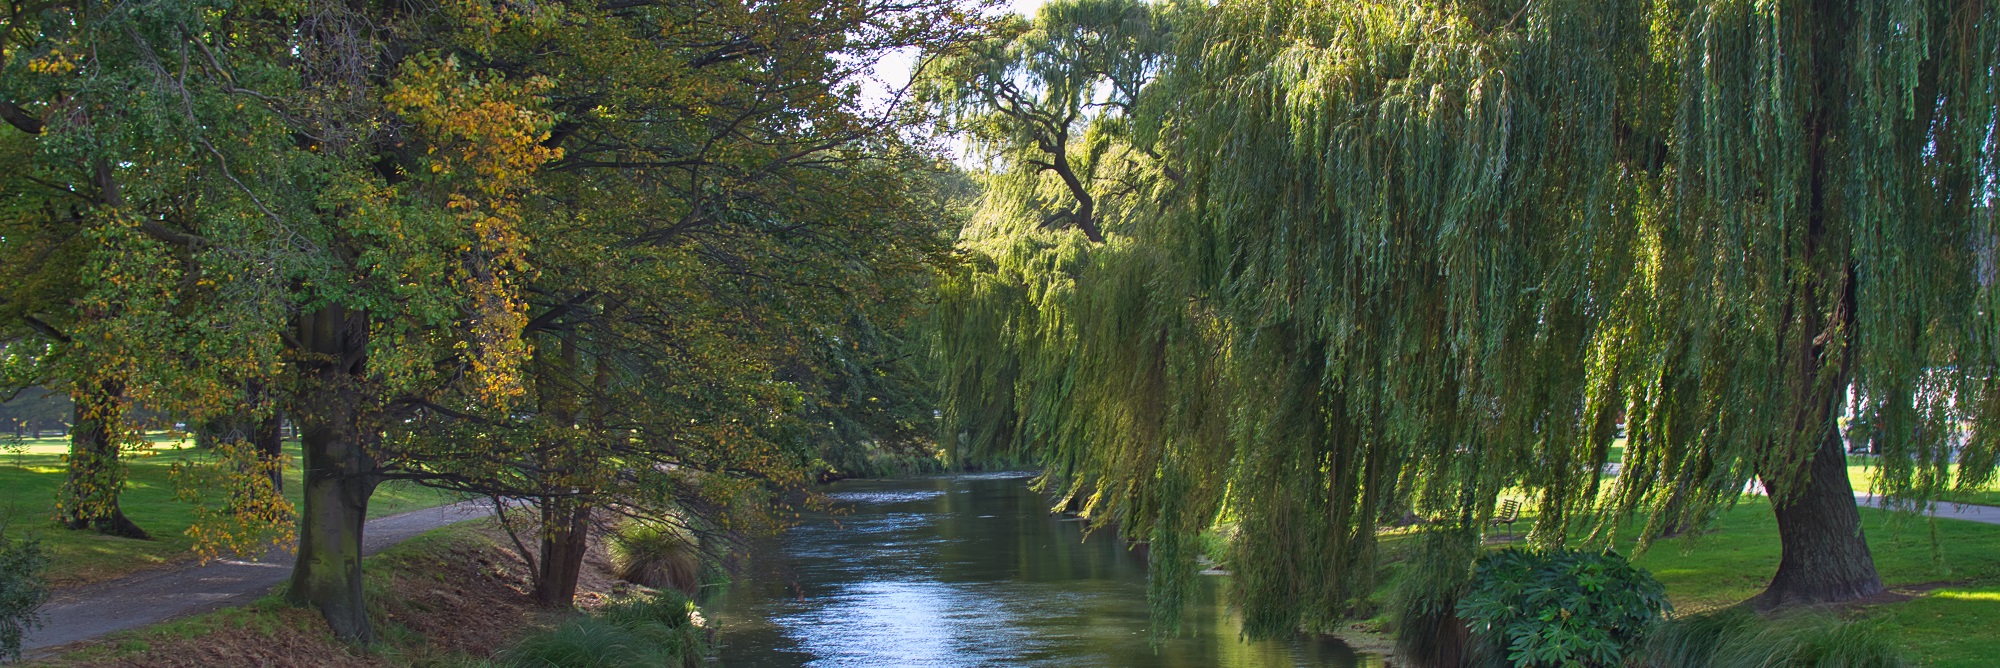 picture of a river in the centre of the frame on a sunny day, flanked on  either side by large, leafy trees native to New Zealand with sunlight  kissing the tops